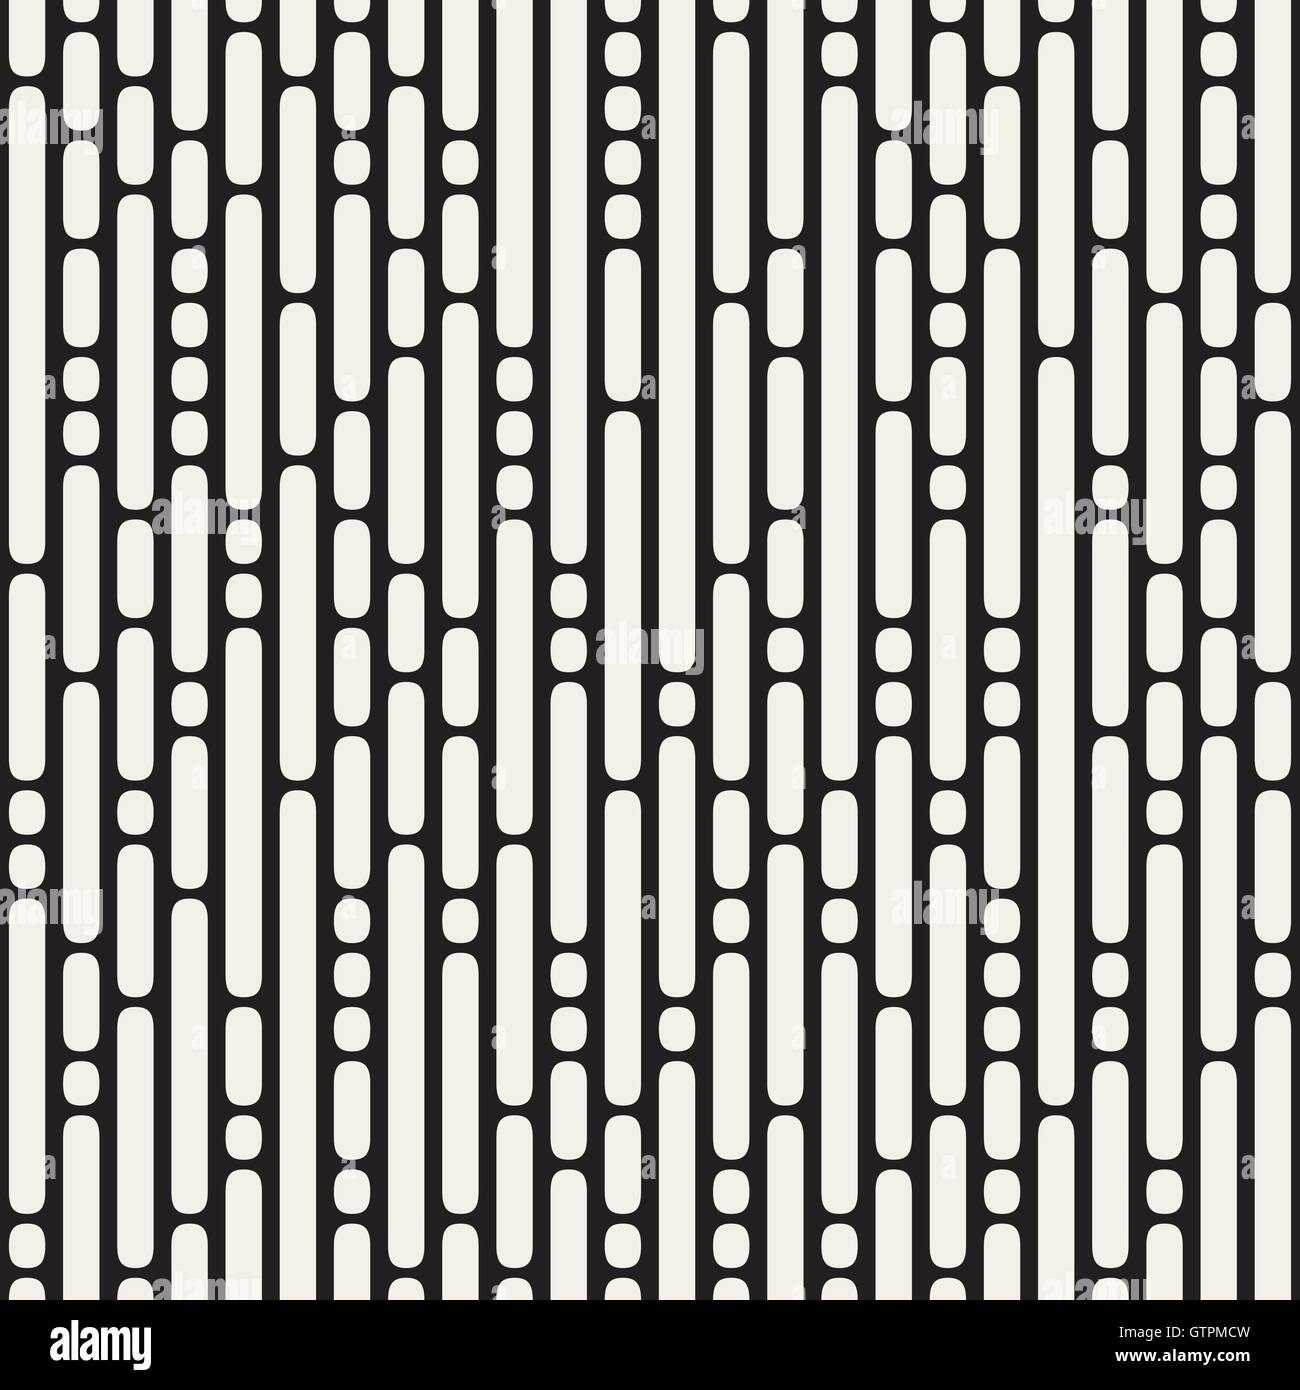 White Dash Square Seamless On Black Background. Vector Illustration.  Royalty Free SVG, Cliparts, Vectors, and Stock Illustration. Image 85132954.